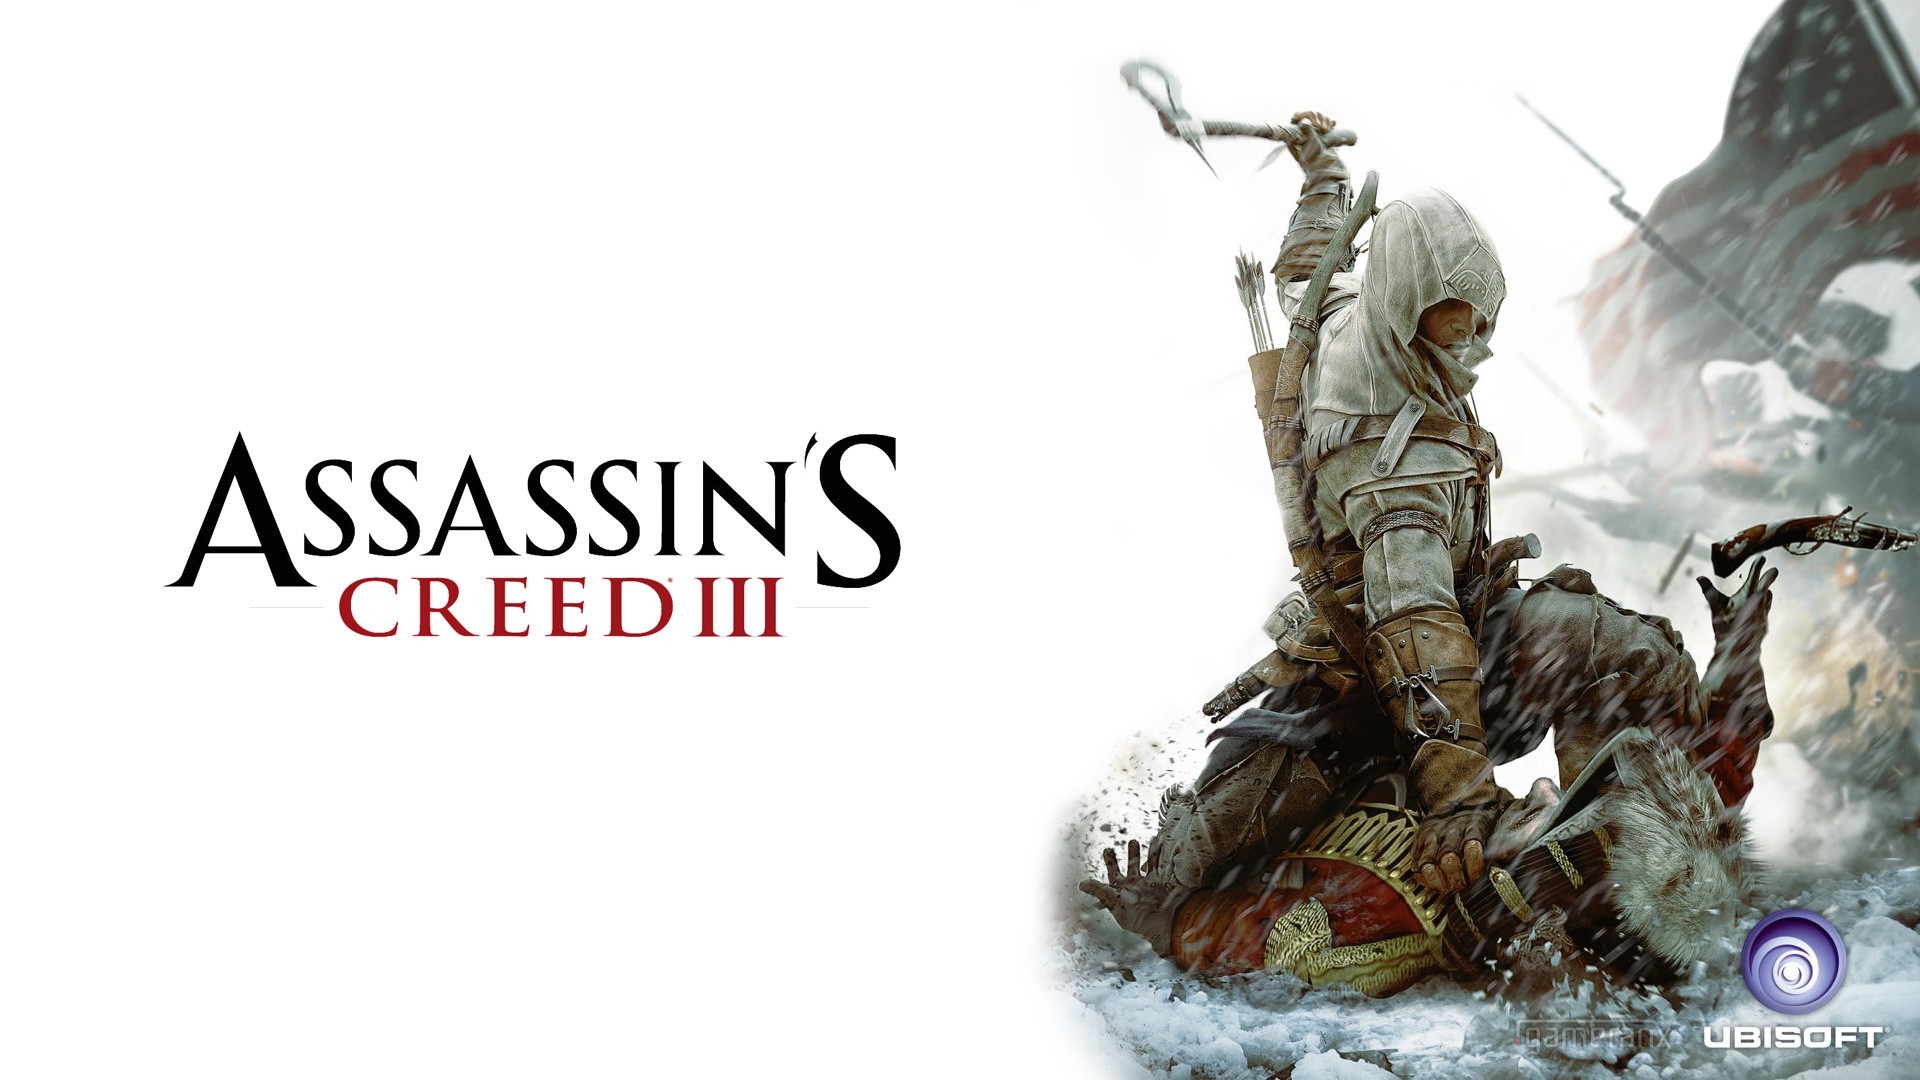 General 1920x1080 Assassin's Creed III video games Ubisoft Assassin's Creed simple background white background video game characters Connor Kenway